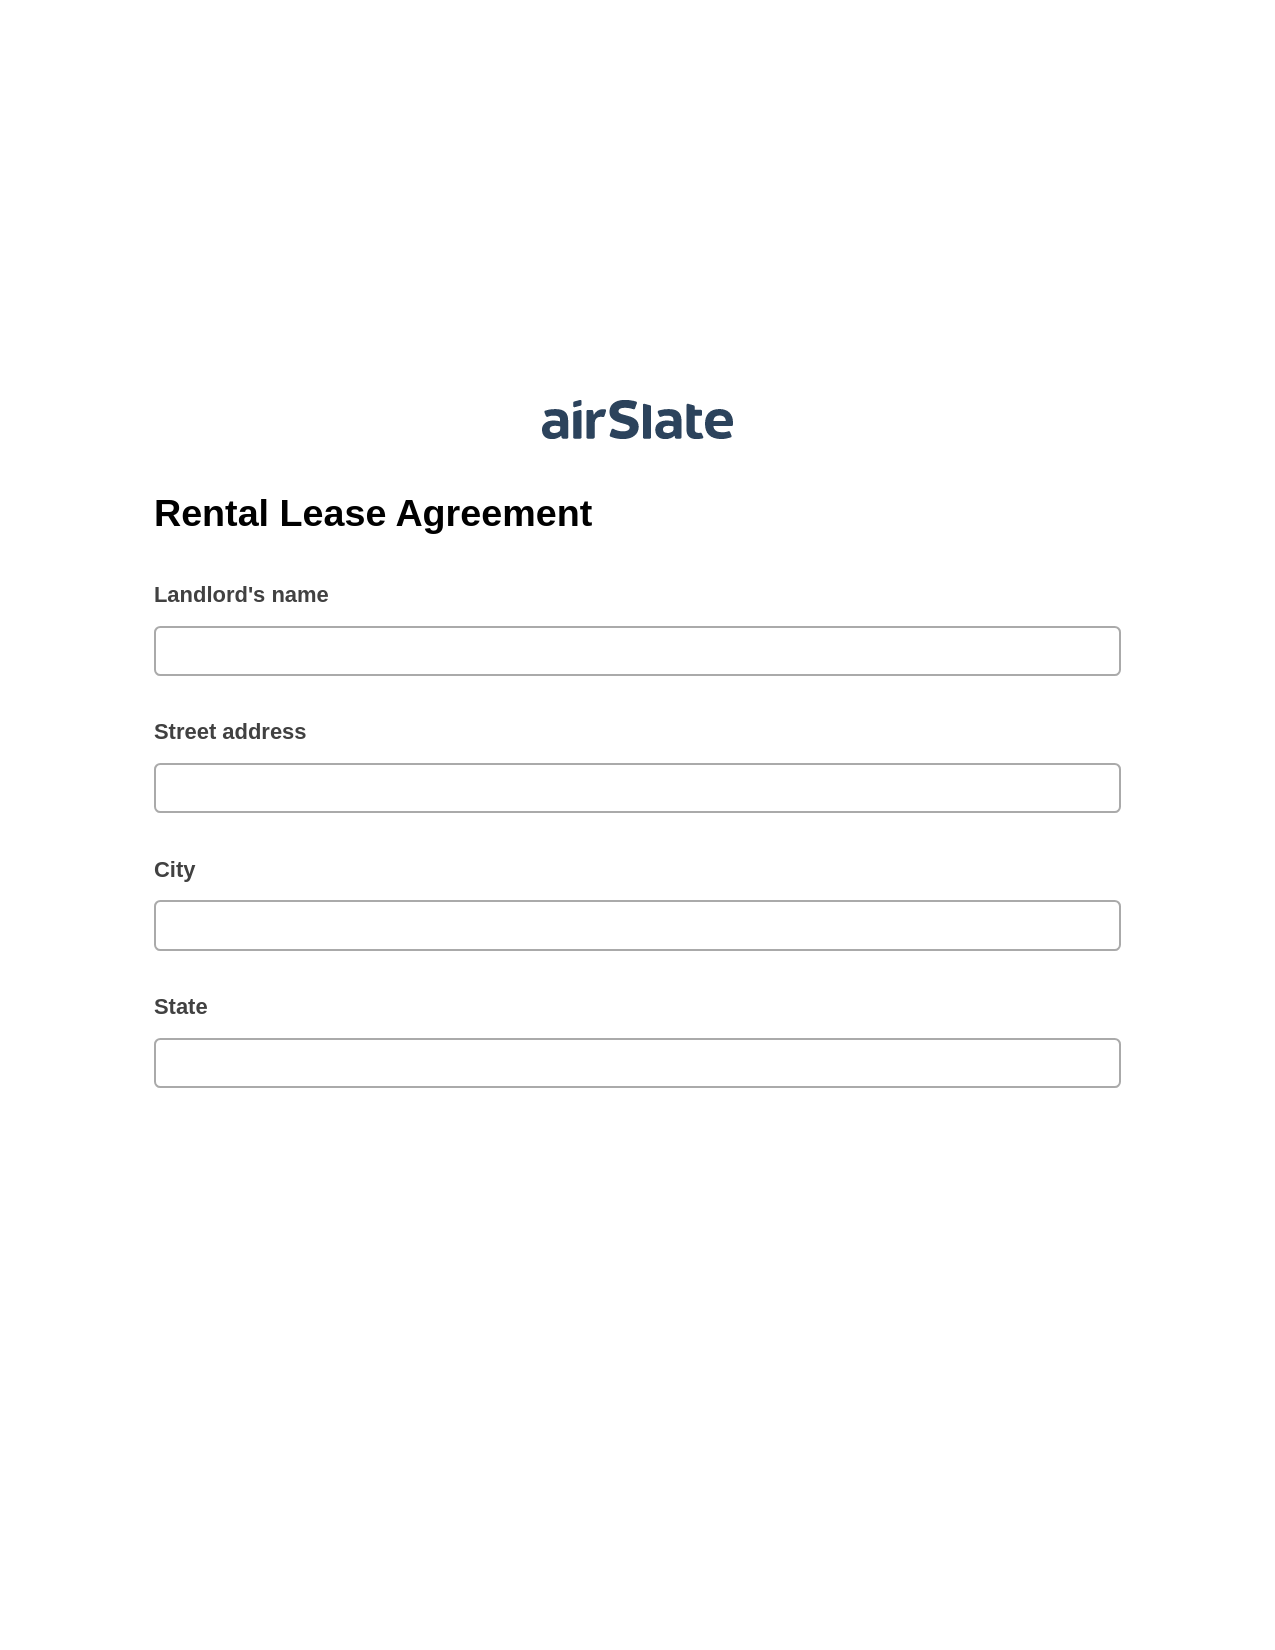 Rental Lease Agreement Pre-fill from Salesforce Record Bot, Invoke Salesforce Process Bot, Post-finish Document Bot